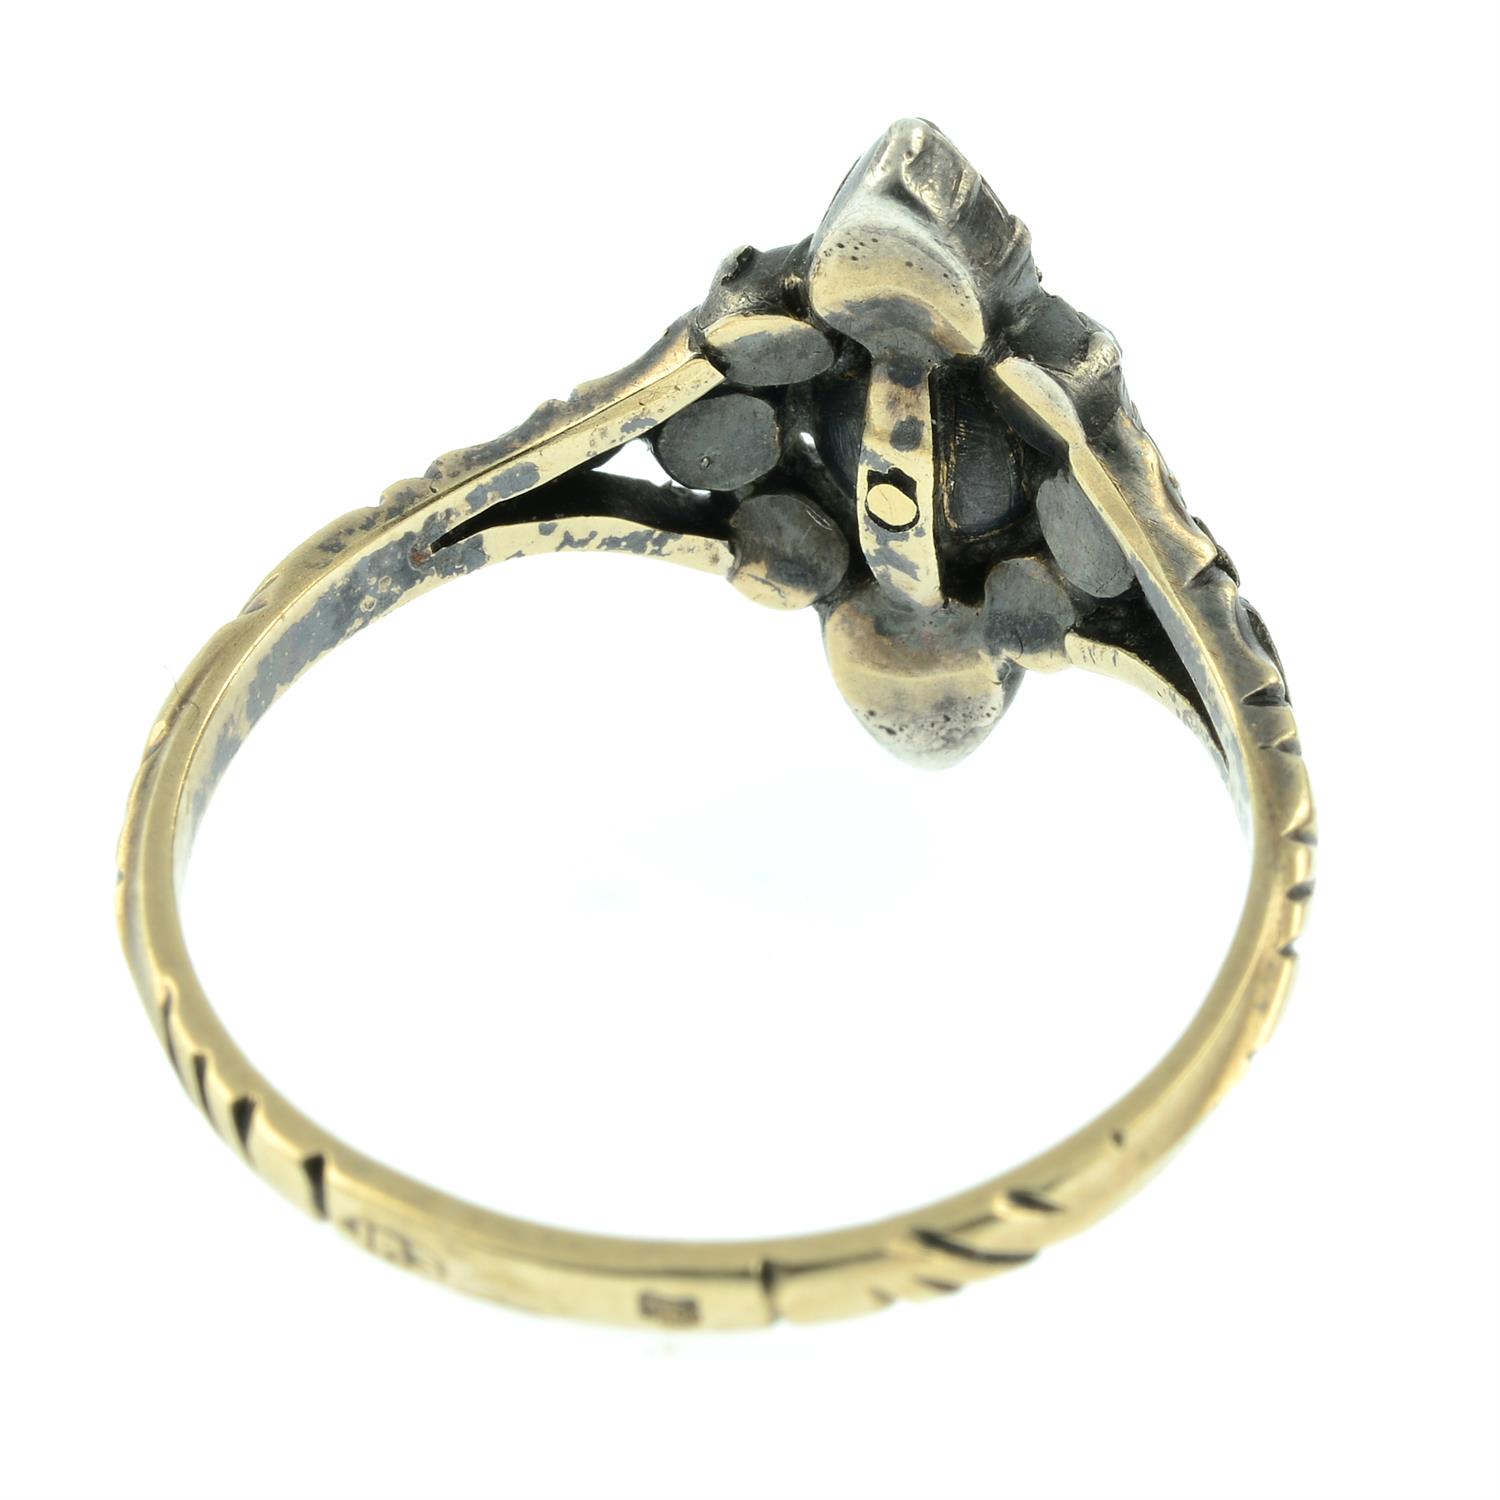 A 19th century silver and gold foil back rose-cut diamond cluster ring. - Image 4 of 5